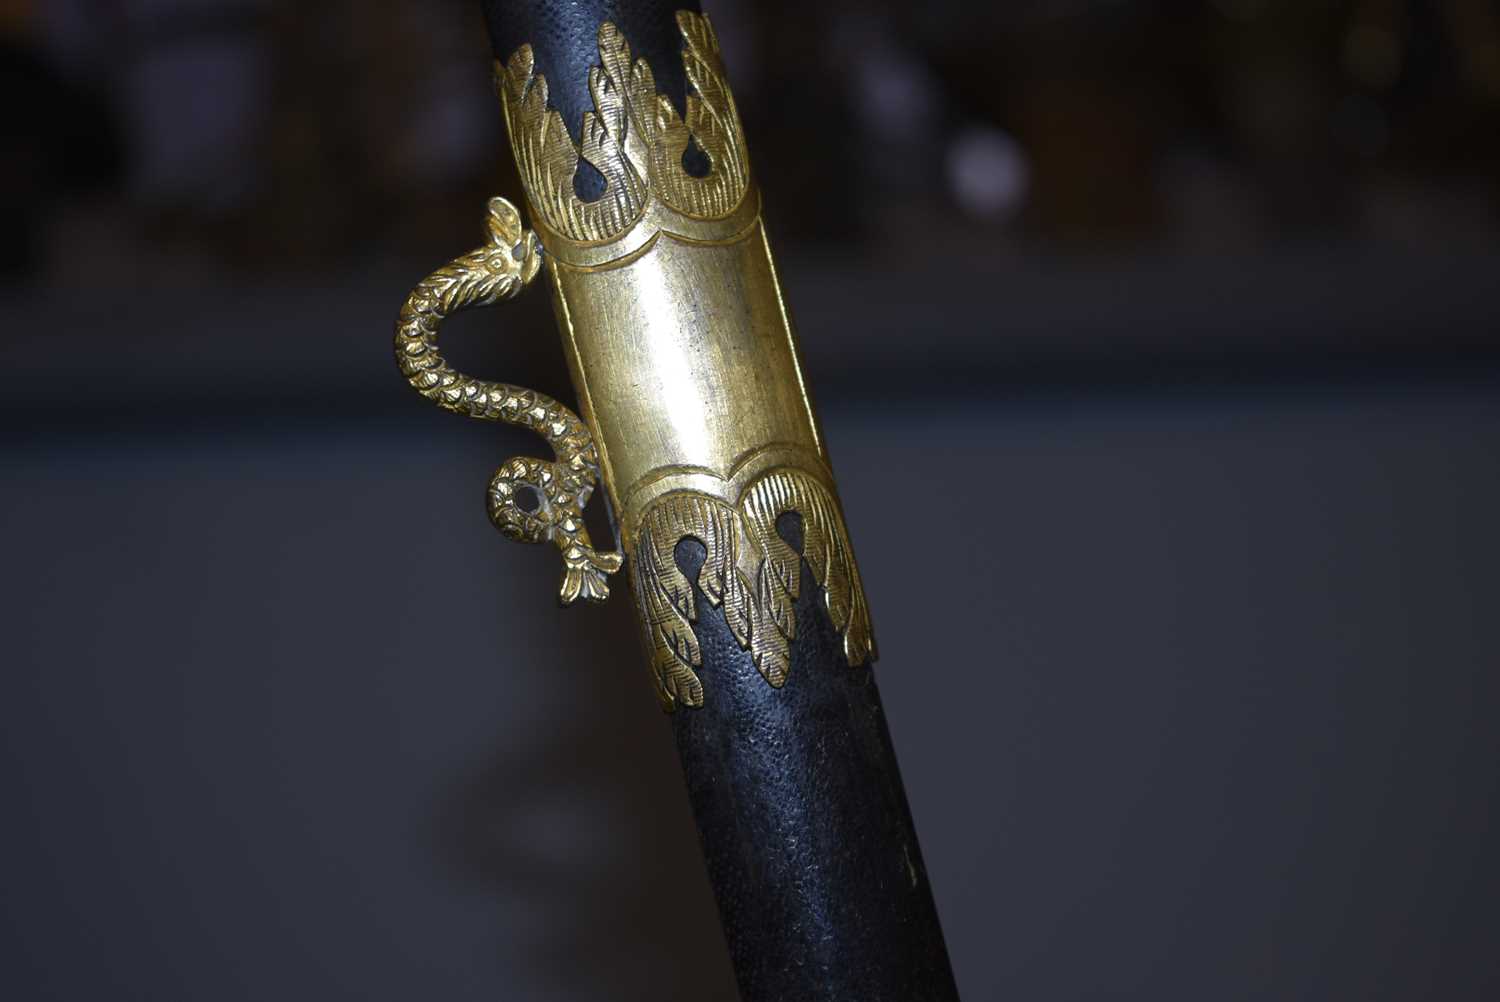 AN ORNATELY MOUNTED GEORGIAN NAVAL OFFICER'S SWORD, - Image 14 of 18